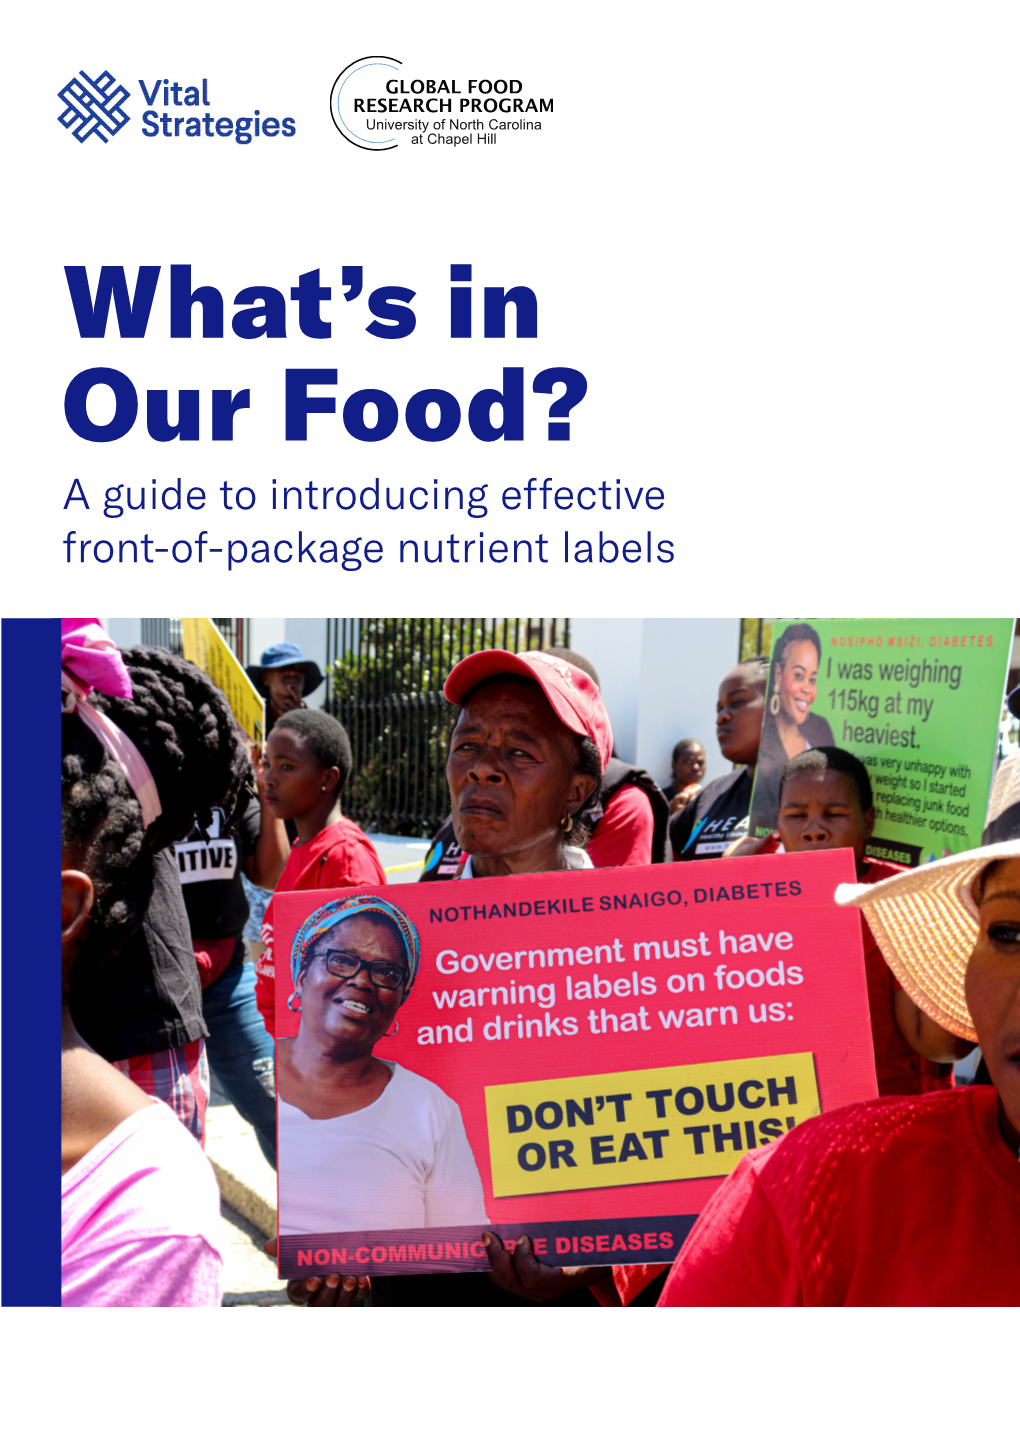 What's in Our Food? a Guide to Introducing Effective Front-Of-Package Nutrient Labels